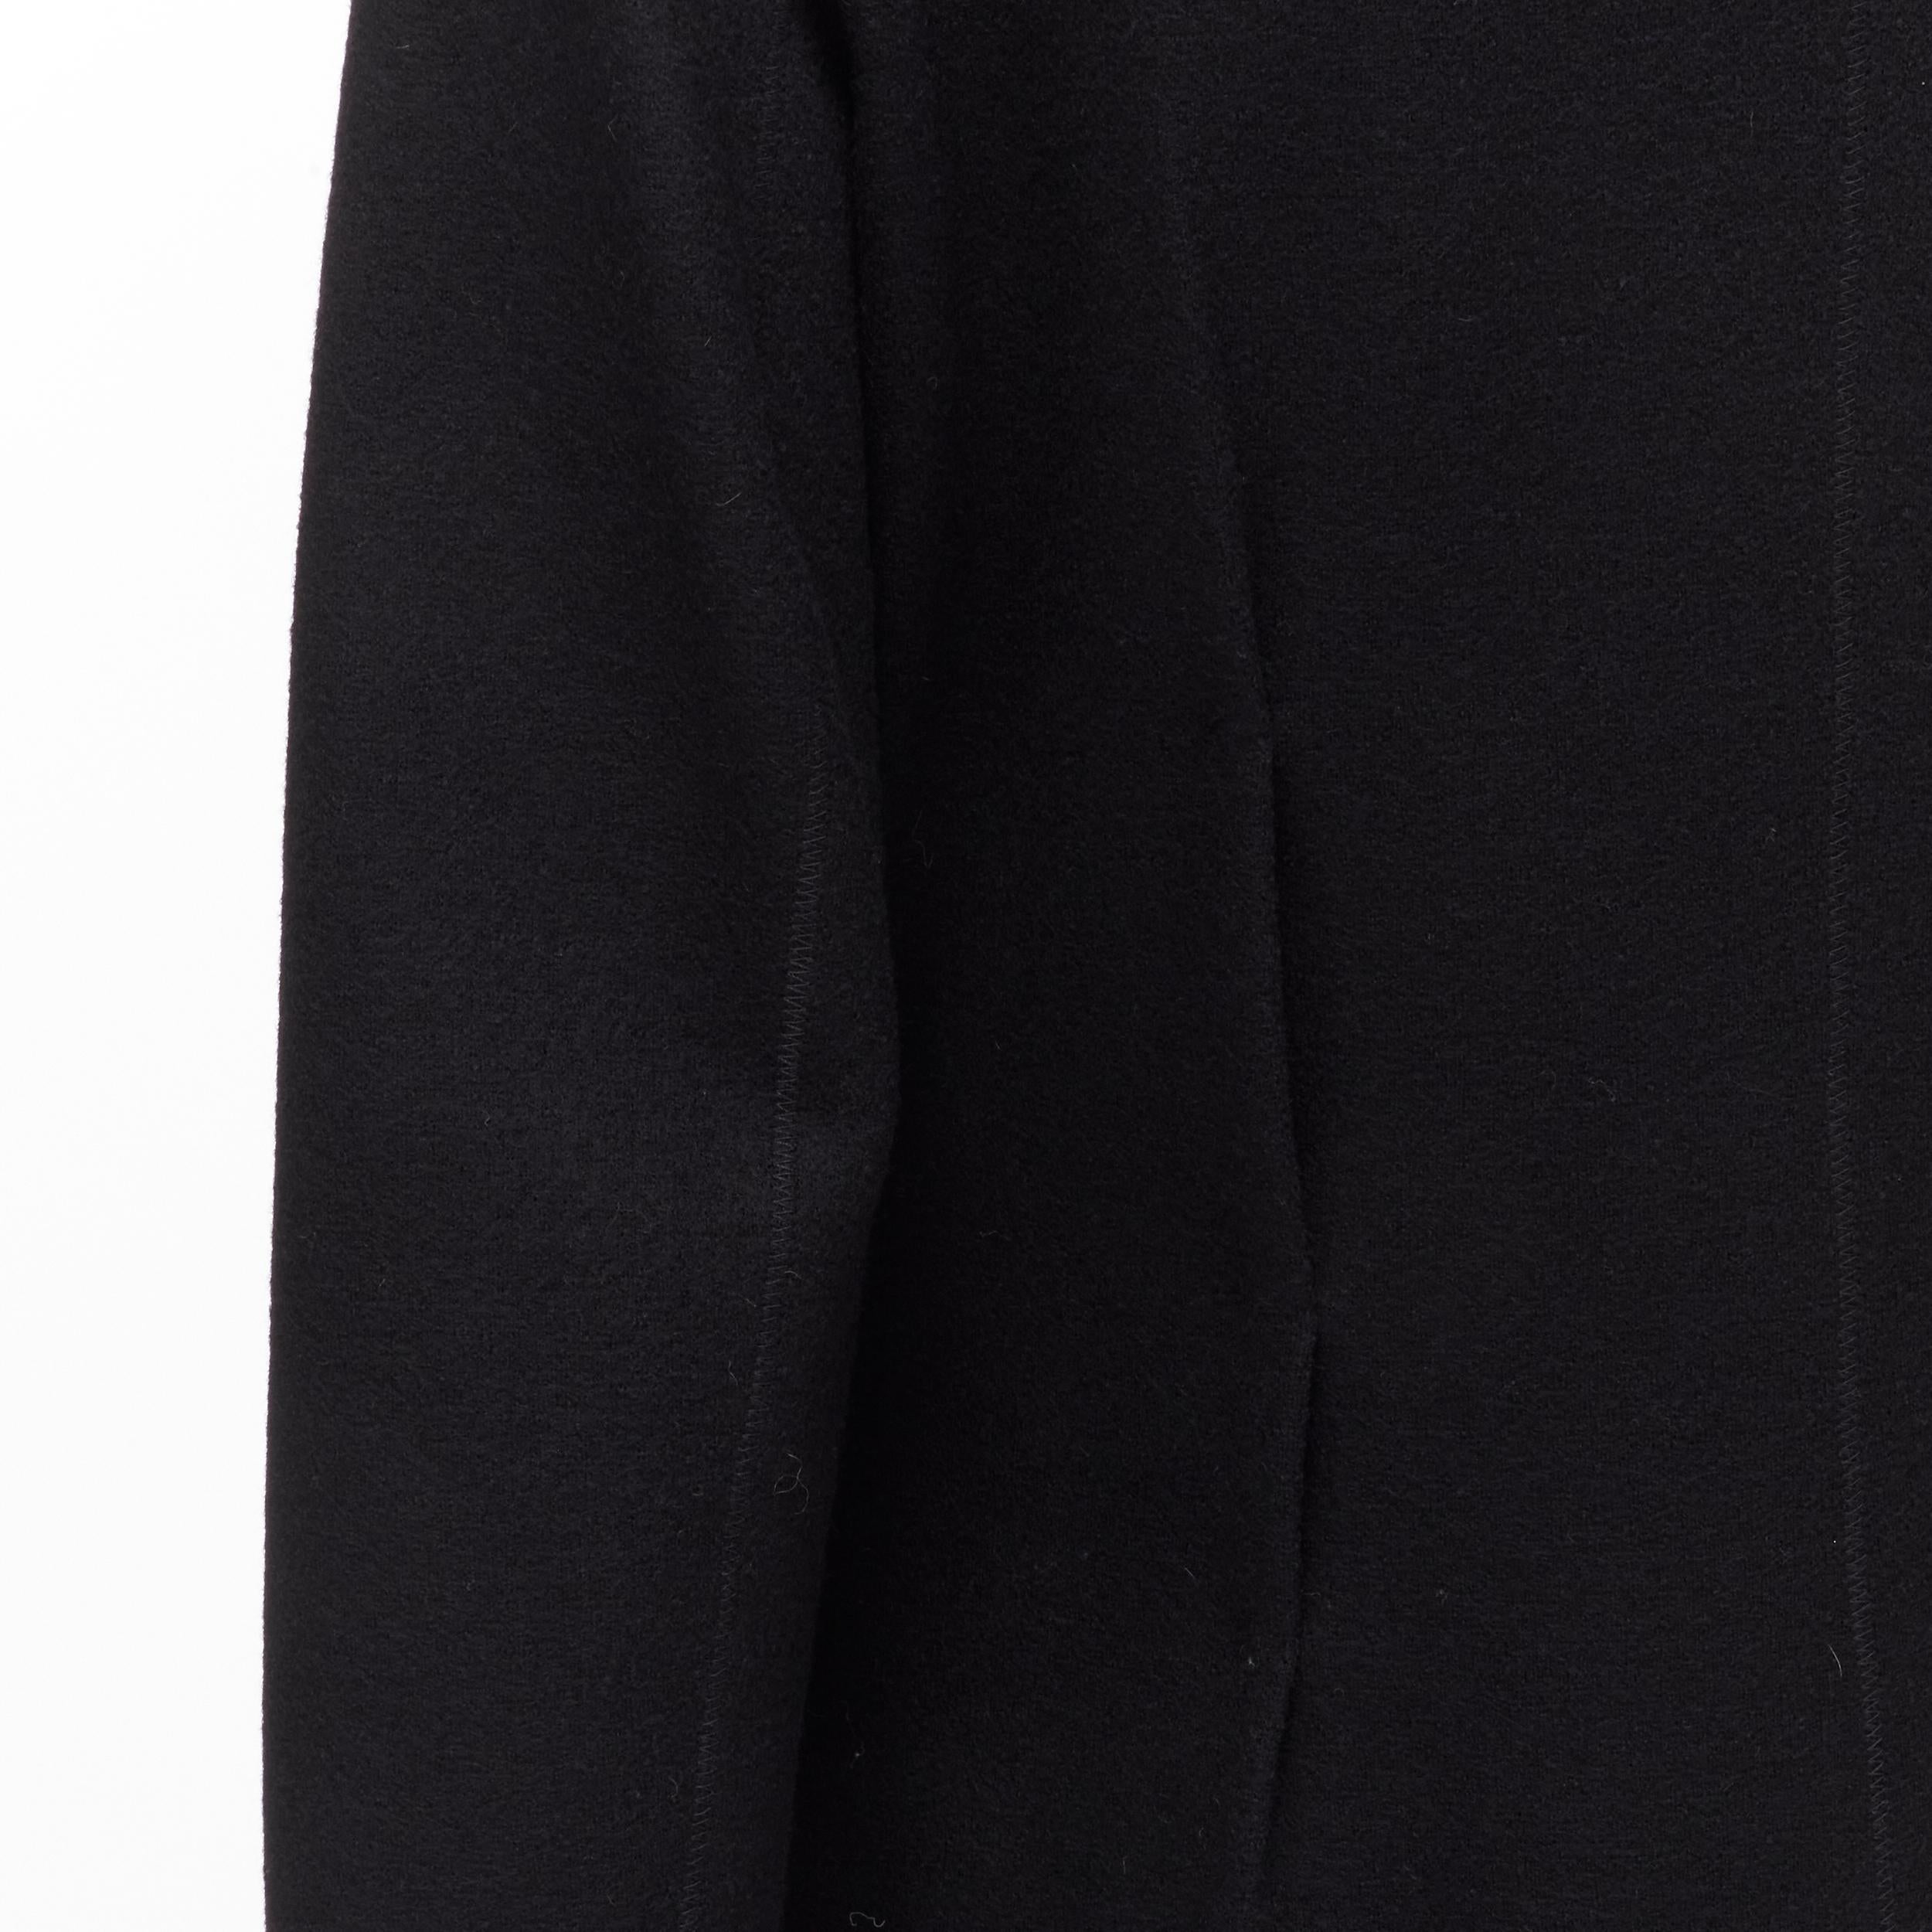 LANVIN Alber Elbaz 2004 black wool pinched darts button front fitted coat FR38 S For Sale 5